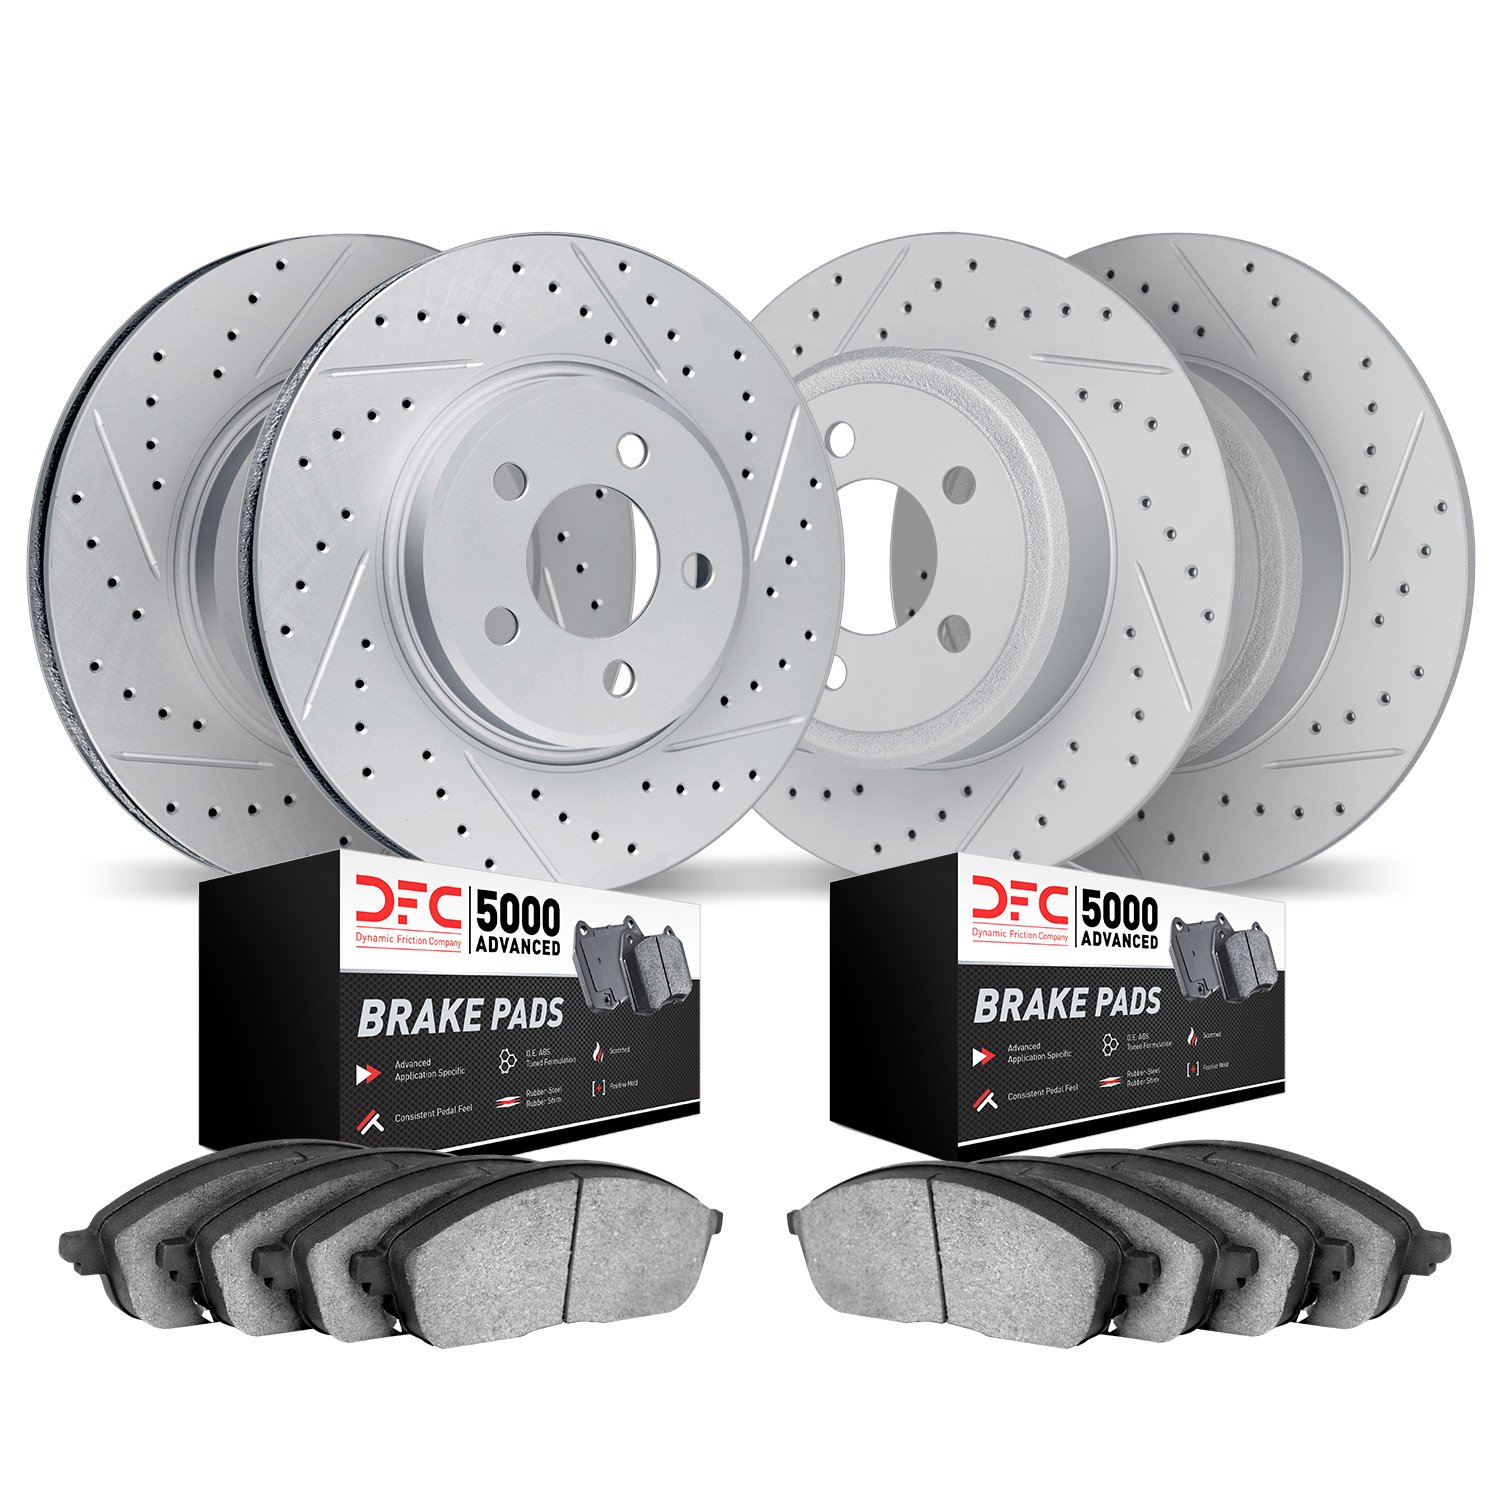 2504-76081 Geoperformance Drilled/Slotted Rotors w/5000 Advanced Brake Pads Kit, 1992-1996 Lexus/Toyota/Scion, Position: Front a